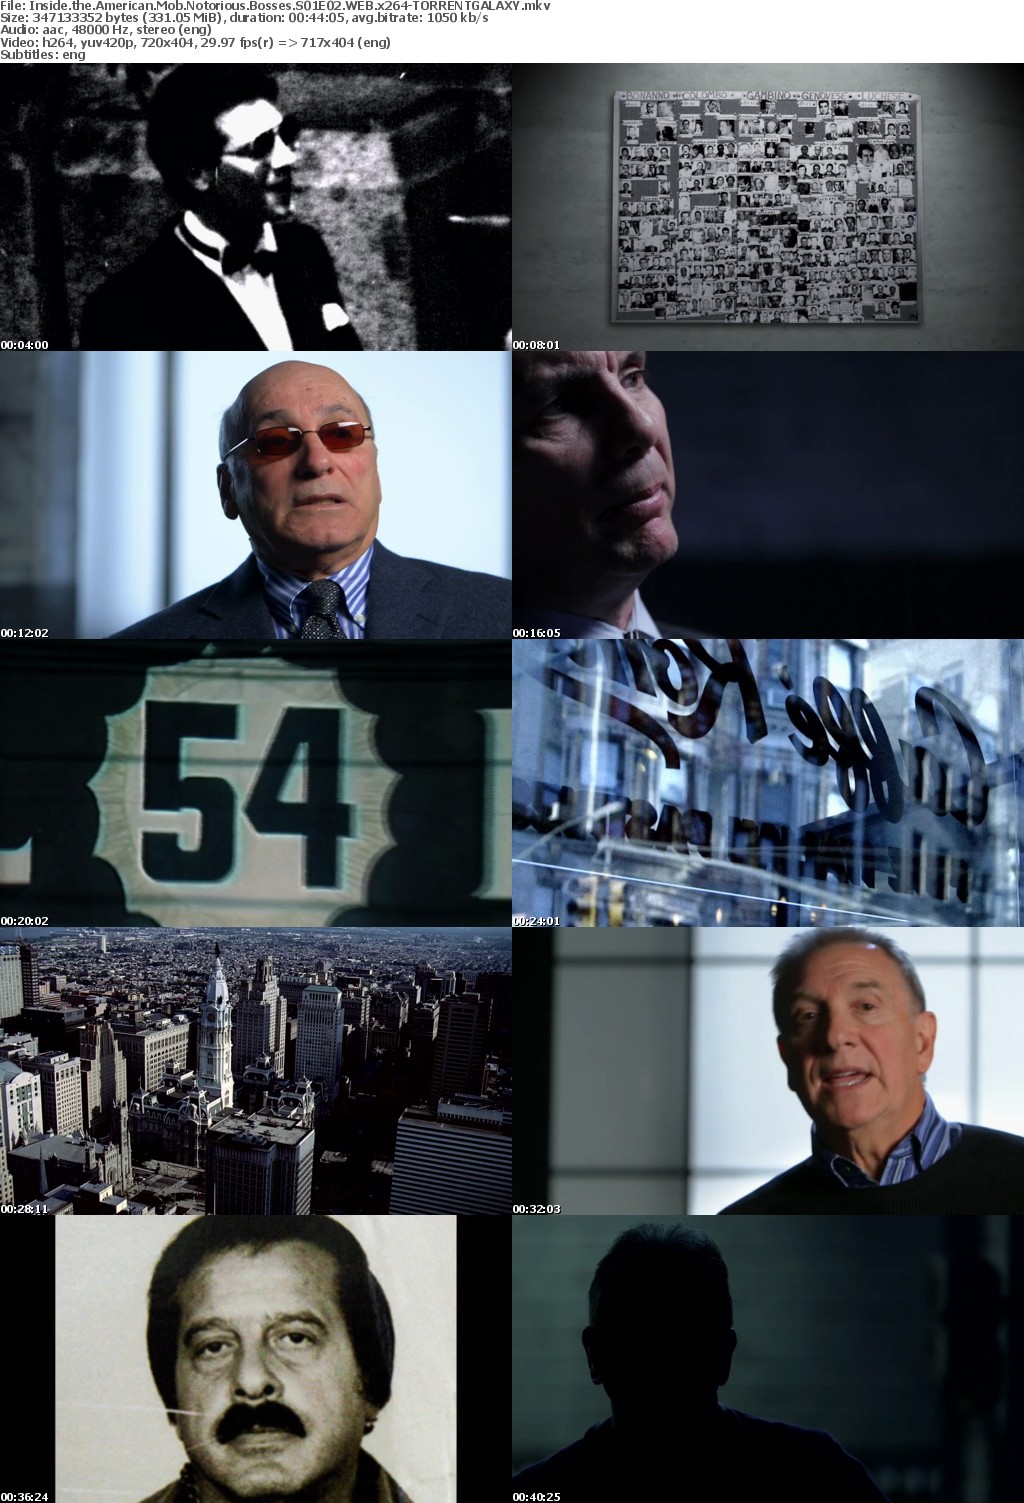 Inside the American Mob Notorious Bosses S01E02 WEB x264-GALAXY